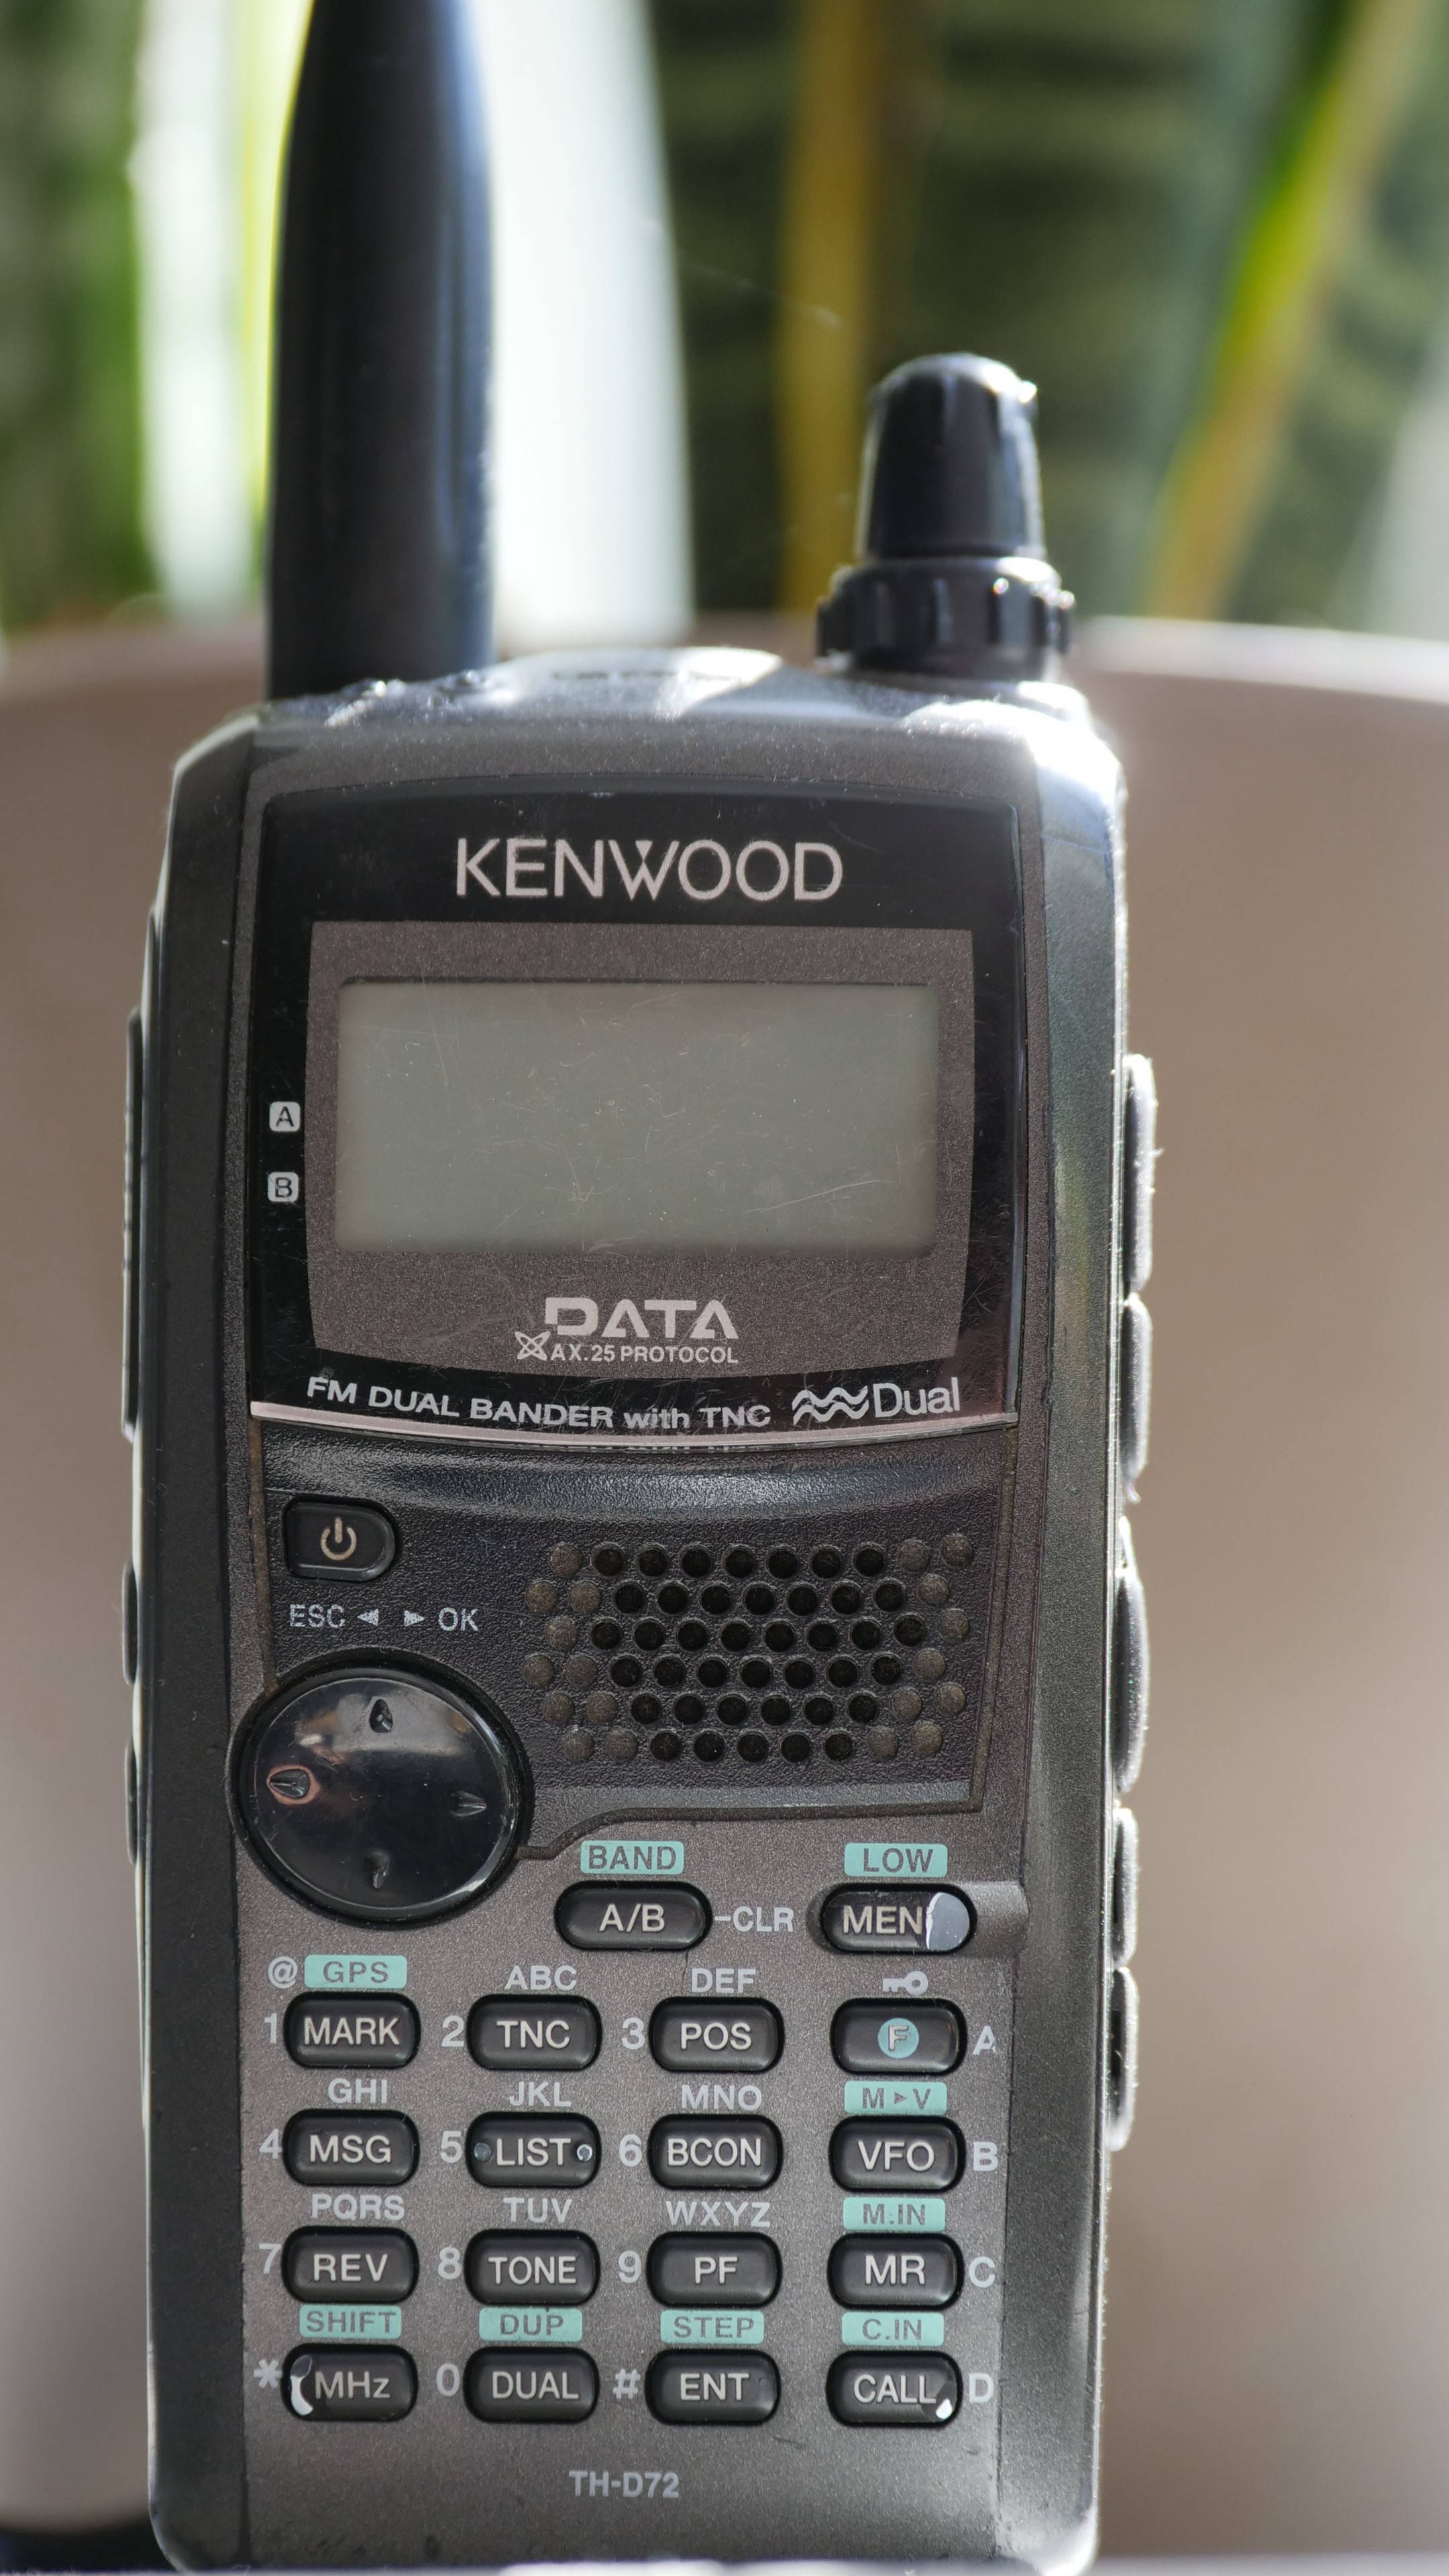 Kenwood TH-D72 hand held transceiver, in it's stock form pictured from the front